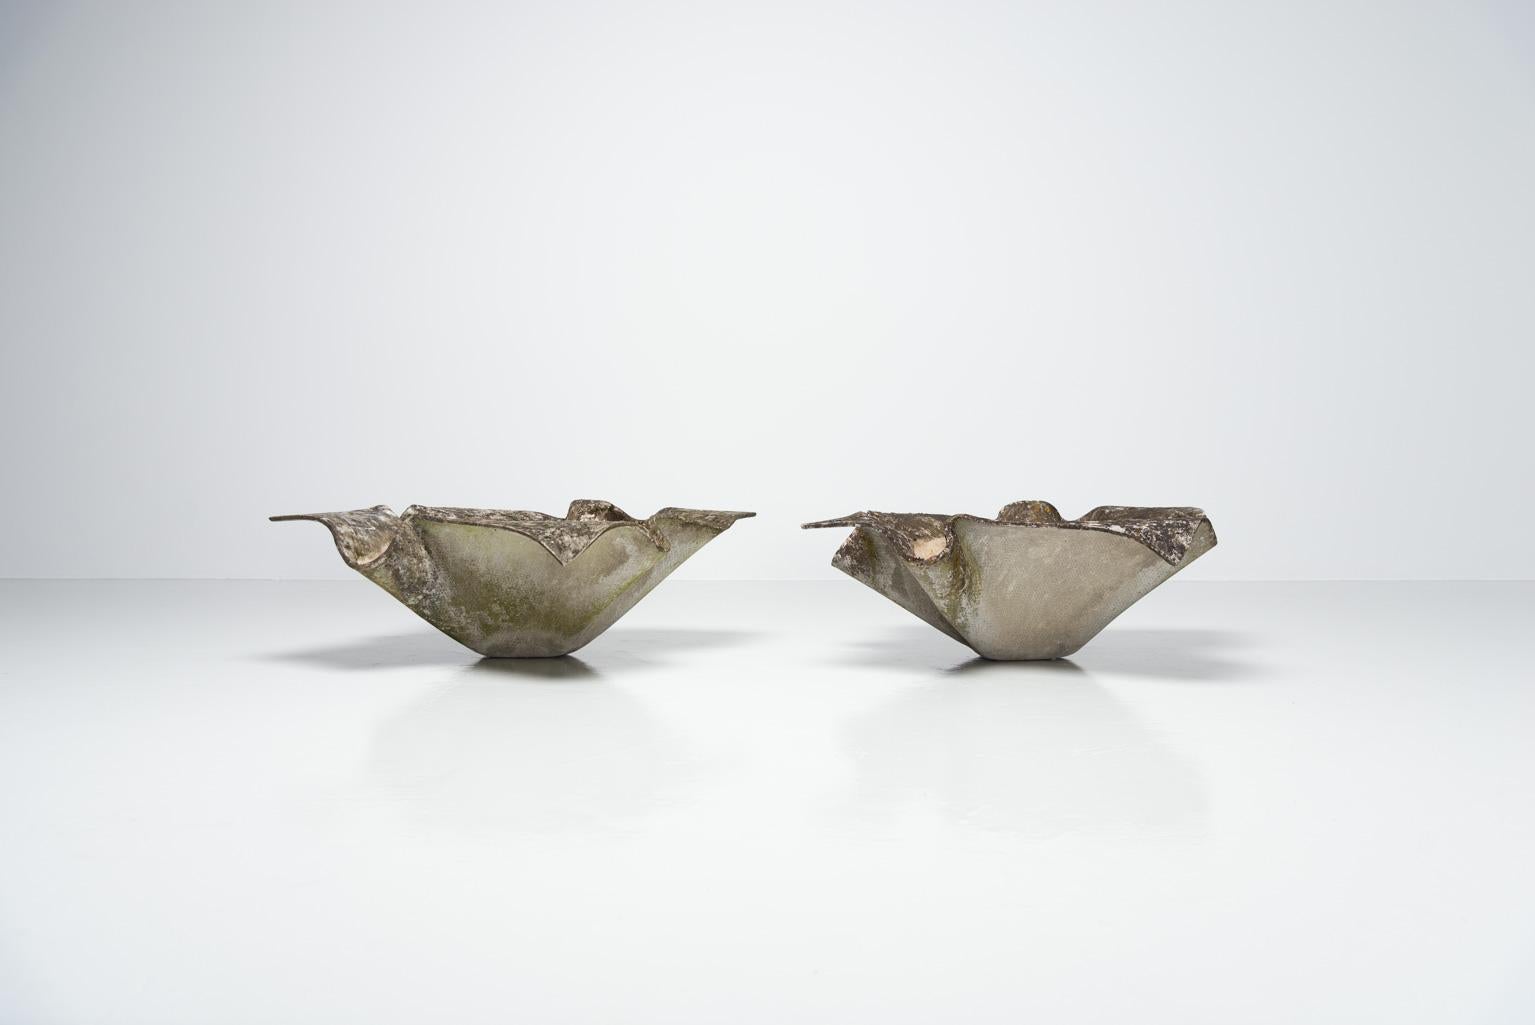 Highly decorative and very large pair of outdoor handkerchief shaped planters designed by Willy Guhl, and manufactured by Eternit AG, Switzerland 1960. These planters are made of cellulose infused fiber cement. They have a fantastic patina from